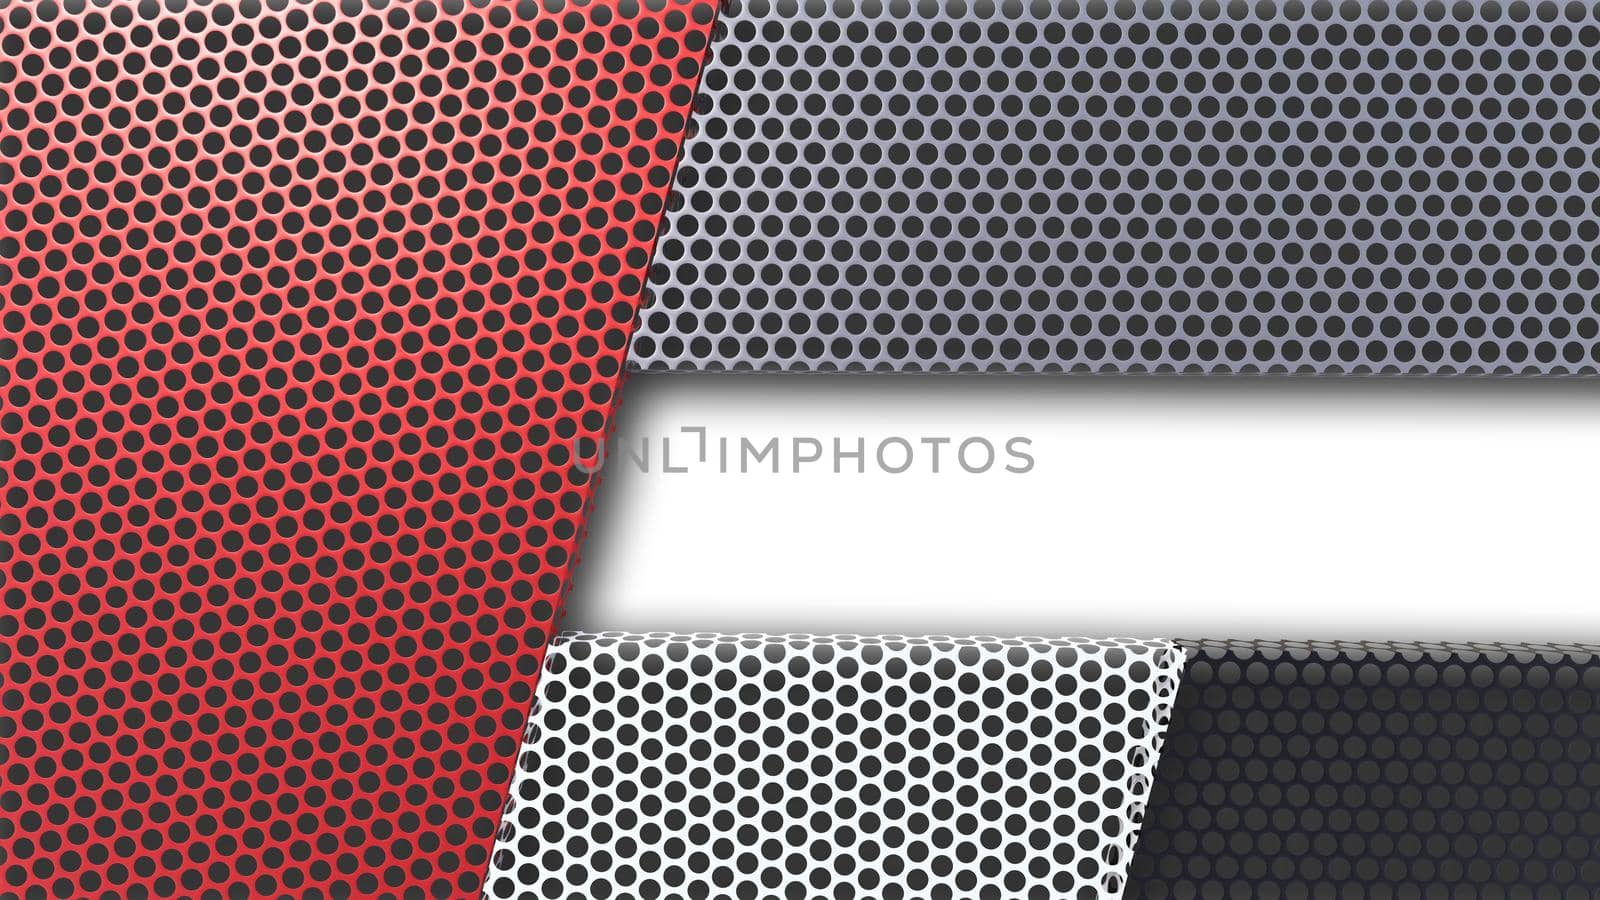 A 3d rendering image of colorful metal mesh plate on white background.